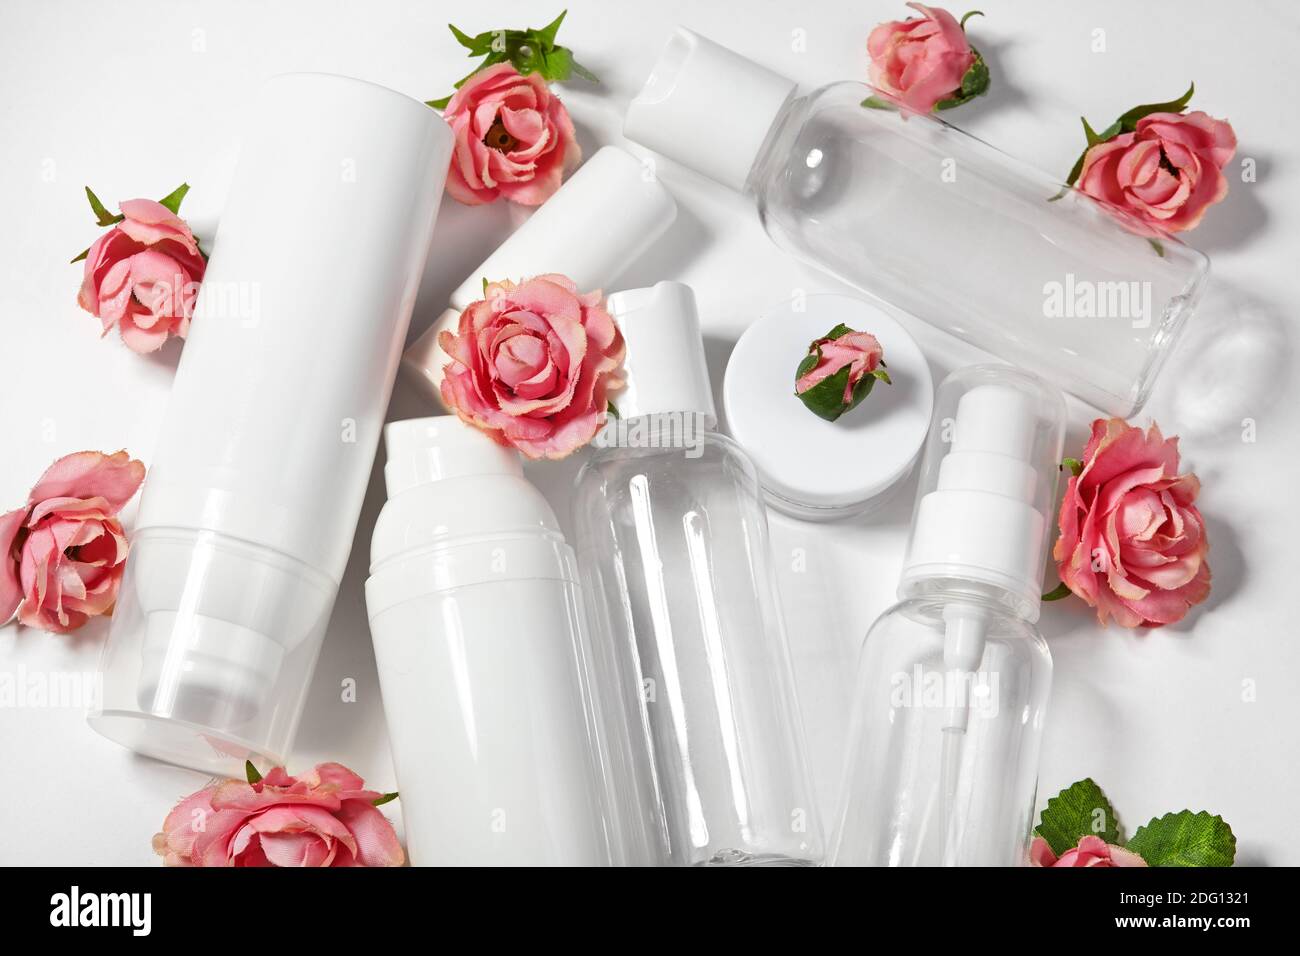 White cosmetic bottles on white background. Wellness, spa and body care bottles collection with spring parfume flowers. Beauty treatment, bathroom set Stock Photo